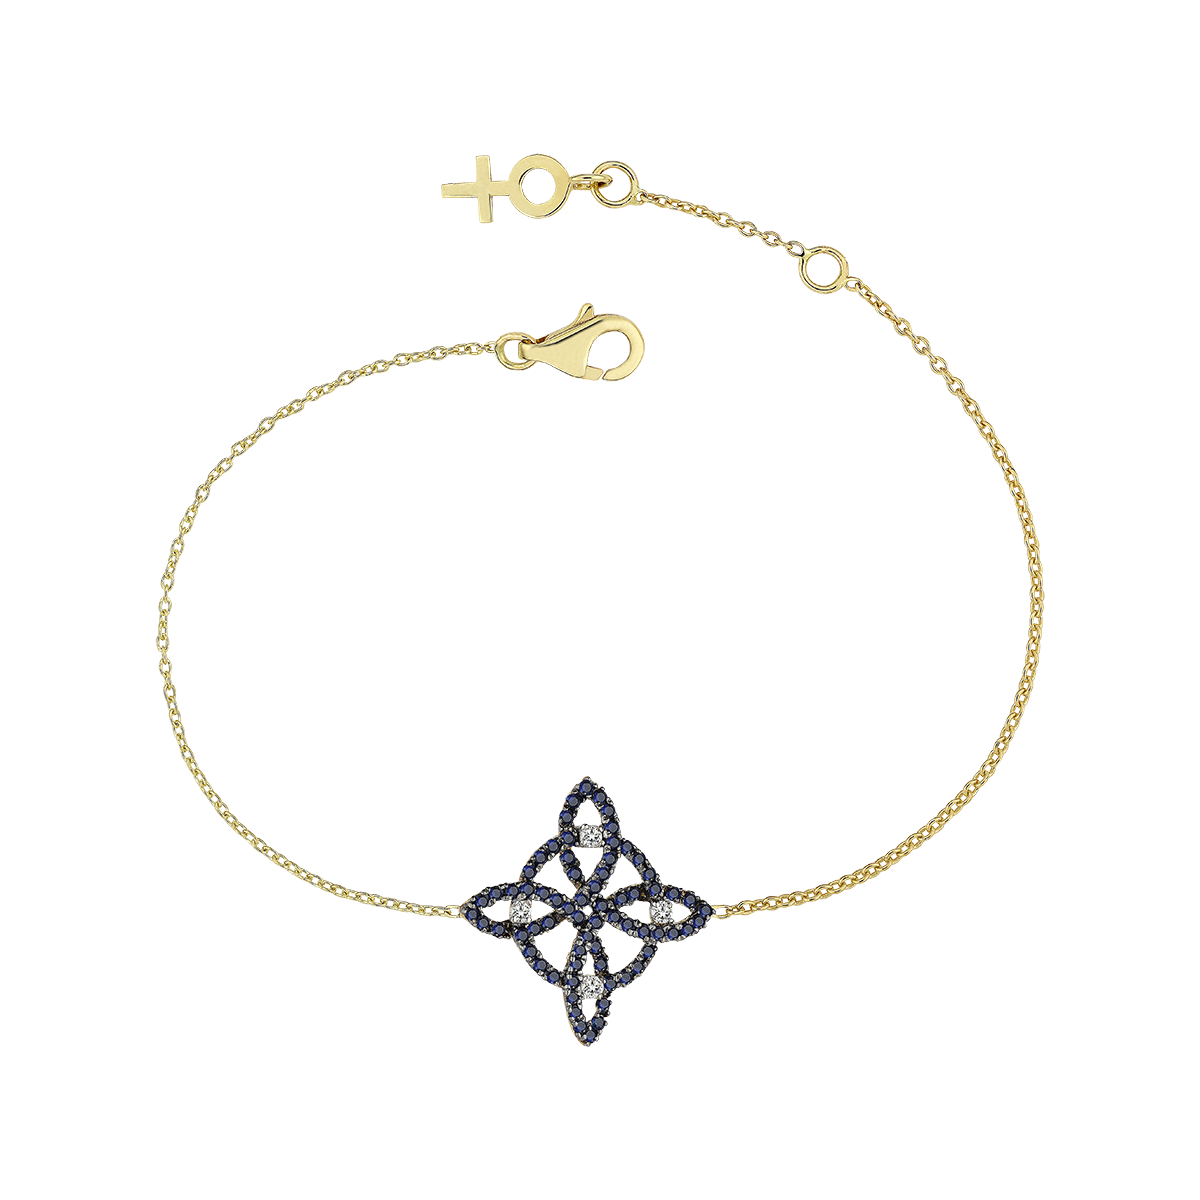 Full Magic Knot in Yellow Gold - Her Story Shop